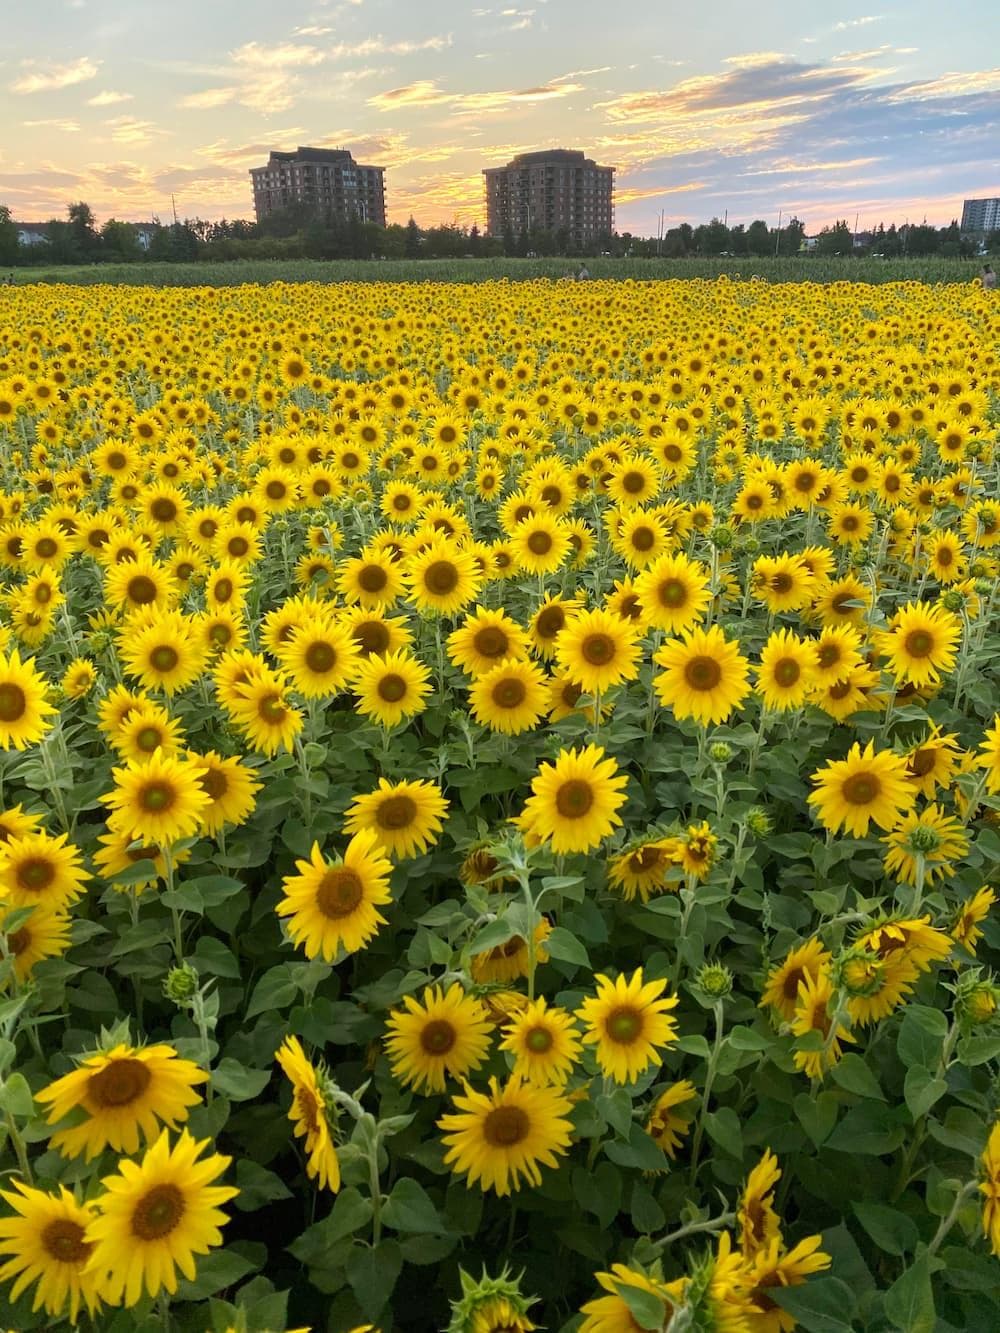 A view of the sunflower field at the Experimental Farm.